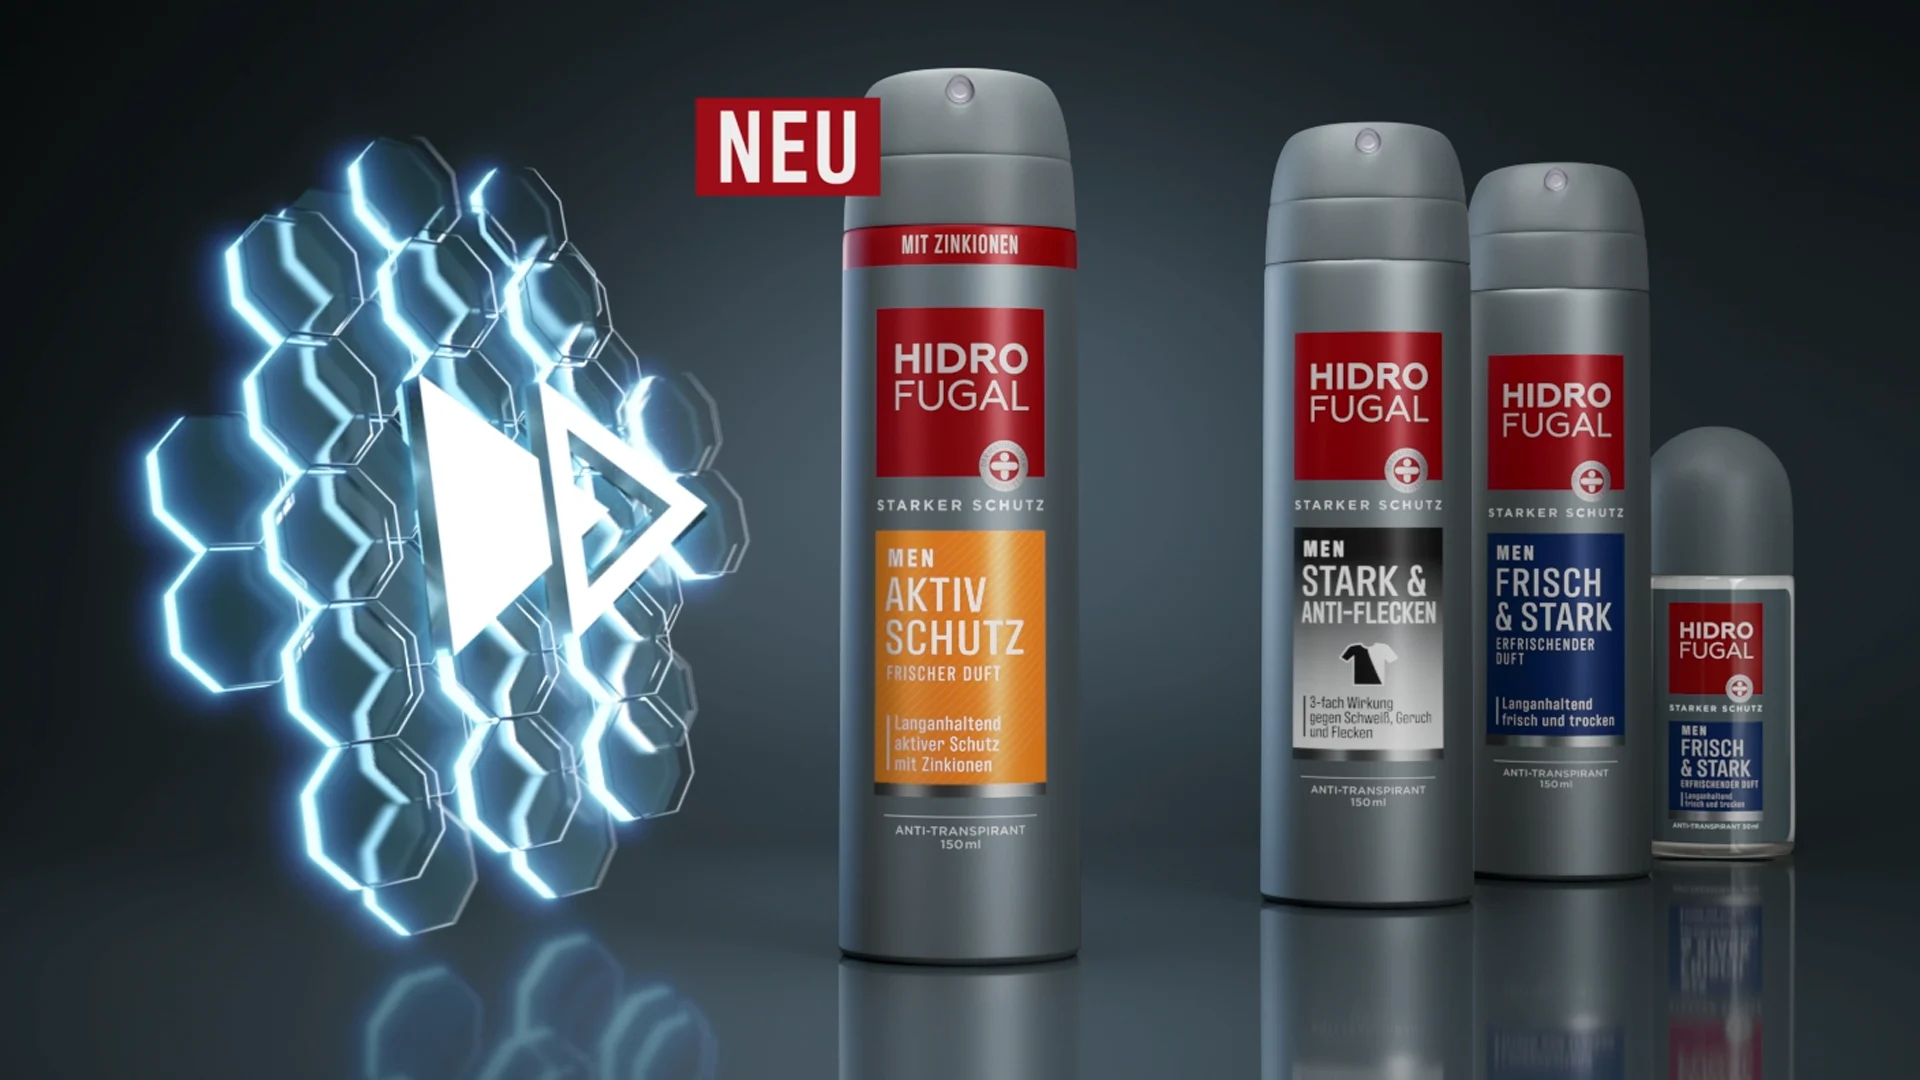 a hidrofugal men packshot containing one hero pack in the middle and three other products on the right side. on the left side there is a call to action button consiting out of a transparent blue honeycomb structure